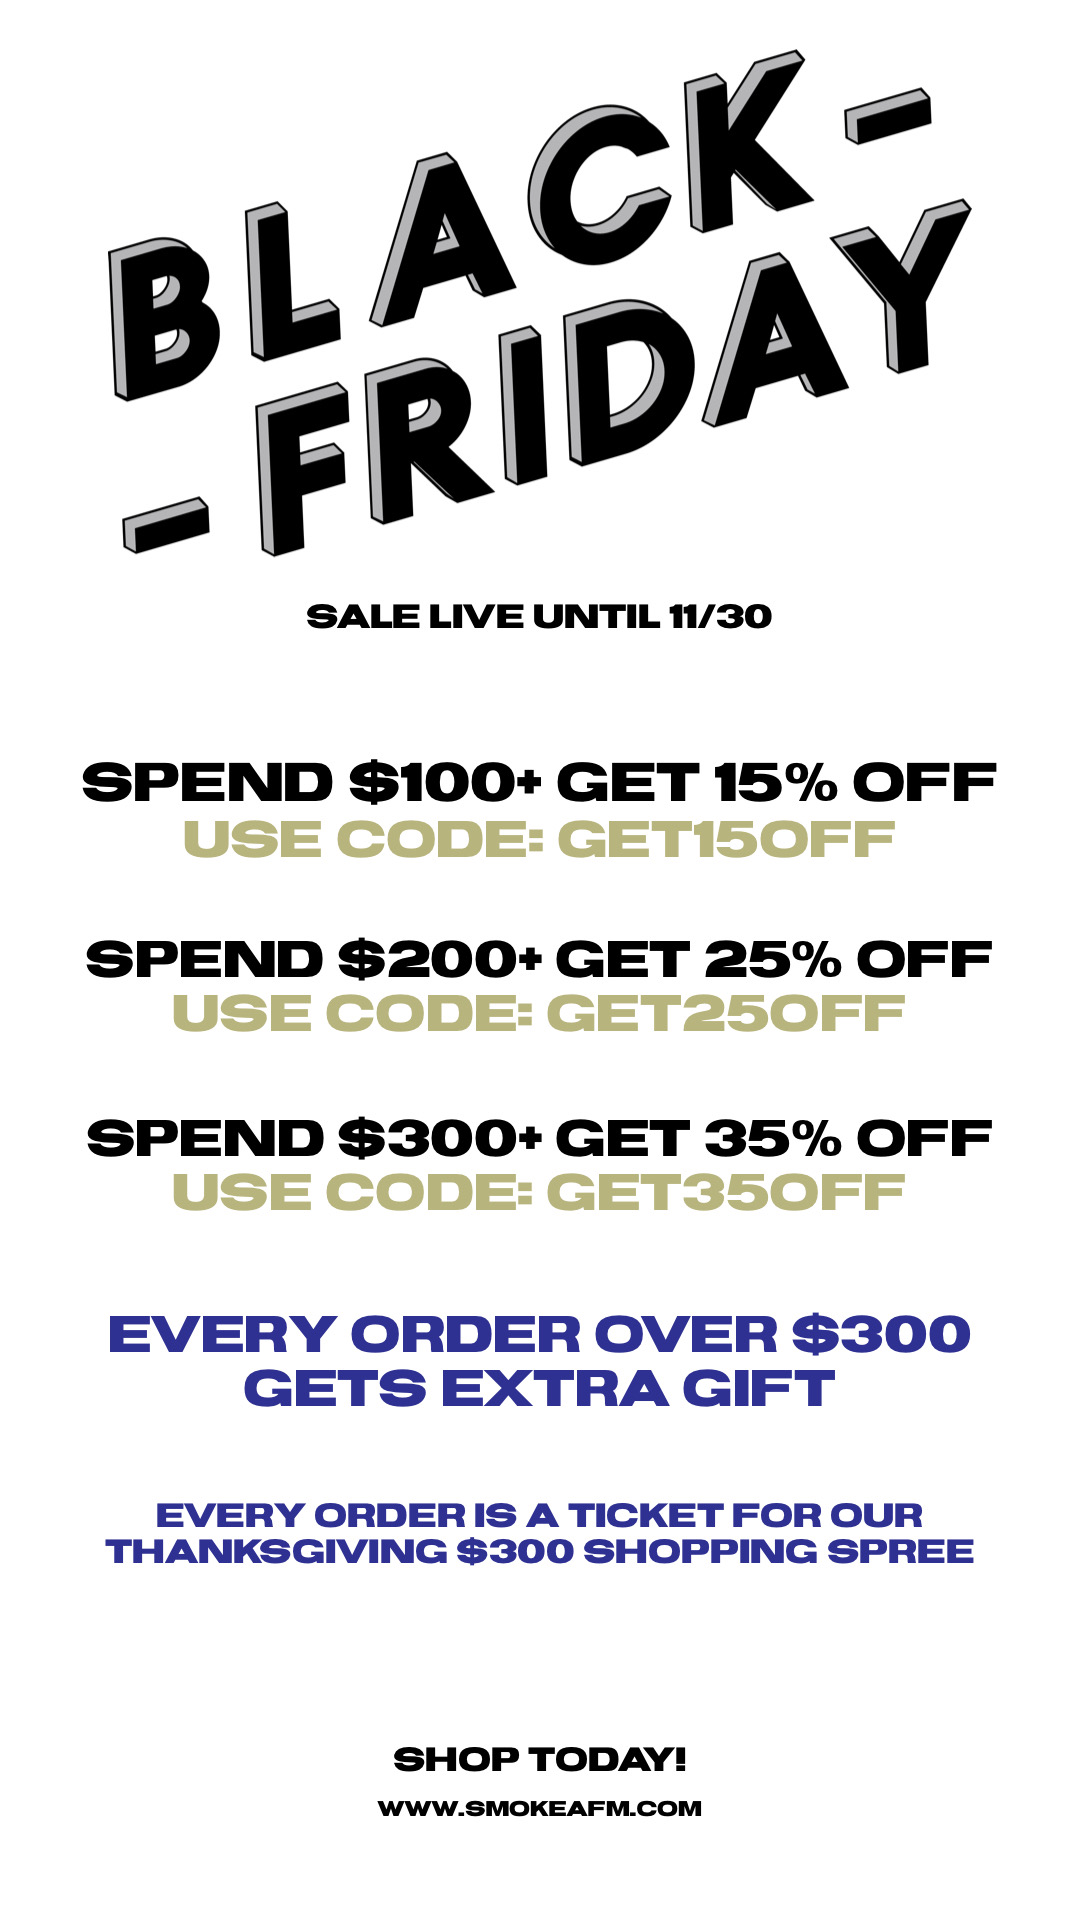 SALE LIVE UNTIL 1130 SPEND $100 GET 15% OFF USE CODE: GET15OFF SPEND $200 GET 25% OFF USE CODE: GET250FF SPEND $300 GET 35% OFF USE CODE: GET350FF EVERY ORDER OVER $300 GETS EXTRA GIFT EVERY ORDERIS A TICKET FOR OUR THANKSGIVING $300 SHOPPING SPREE SHOP TODAY! WWW.SMOKEAFM.COM 